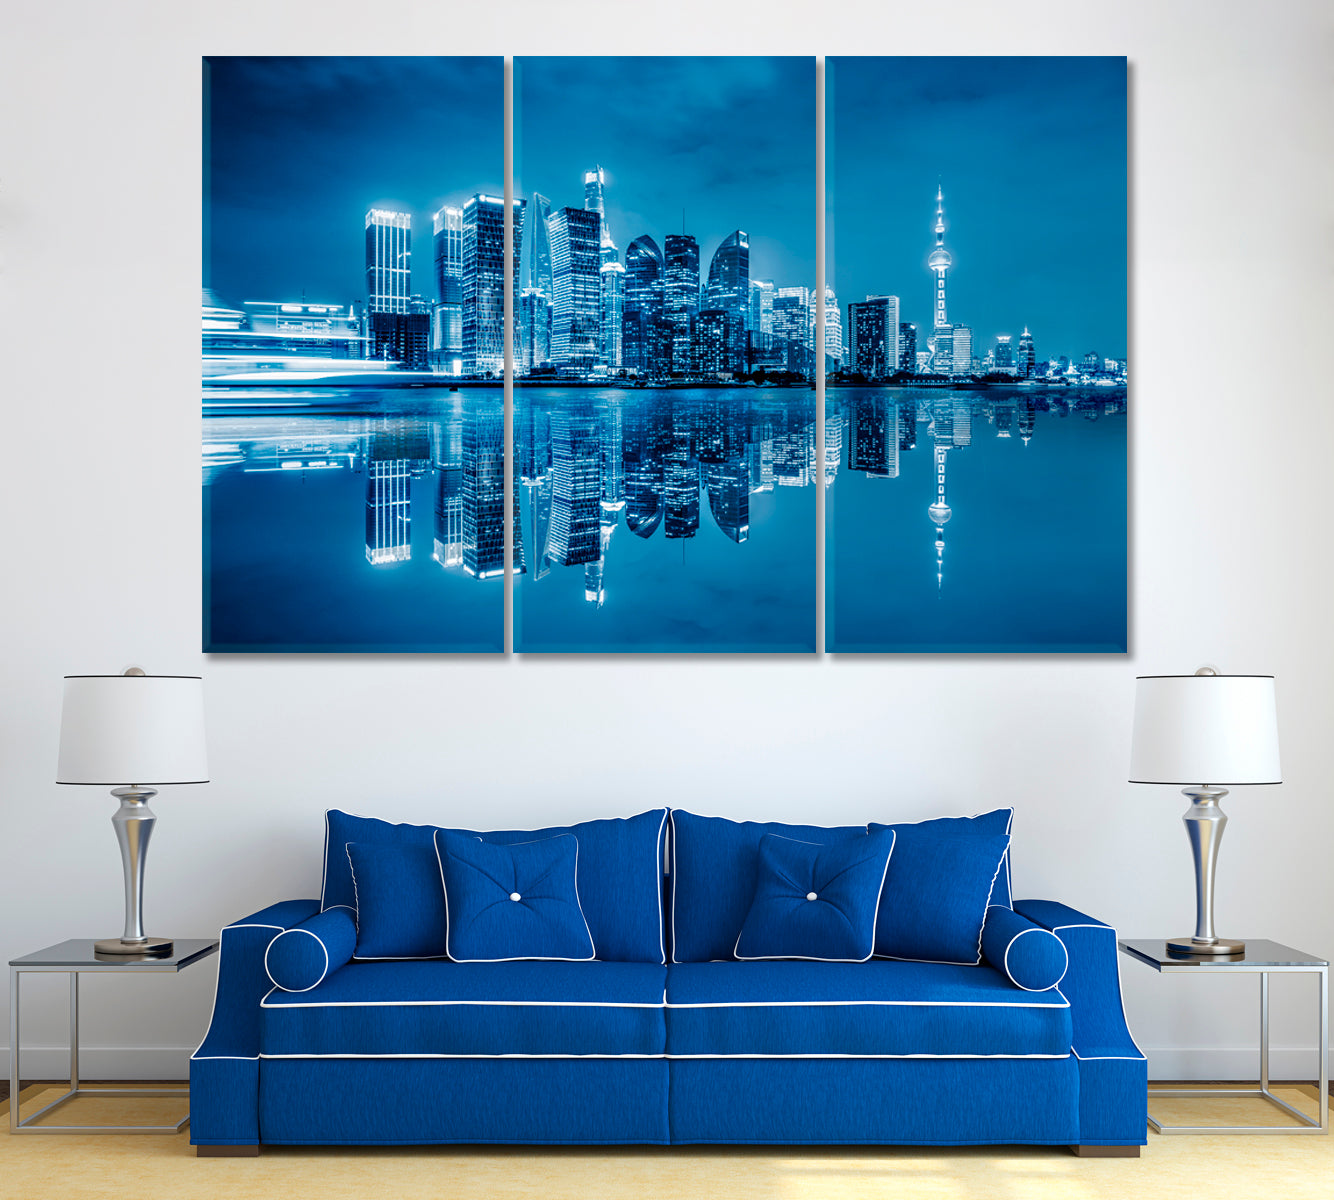 Shanghai Сity Reflection in Huangpu River Canvas Print ArtLexy 3 Panels 36"x24" inches 